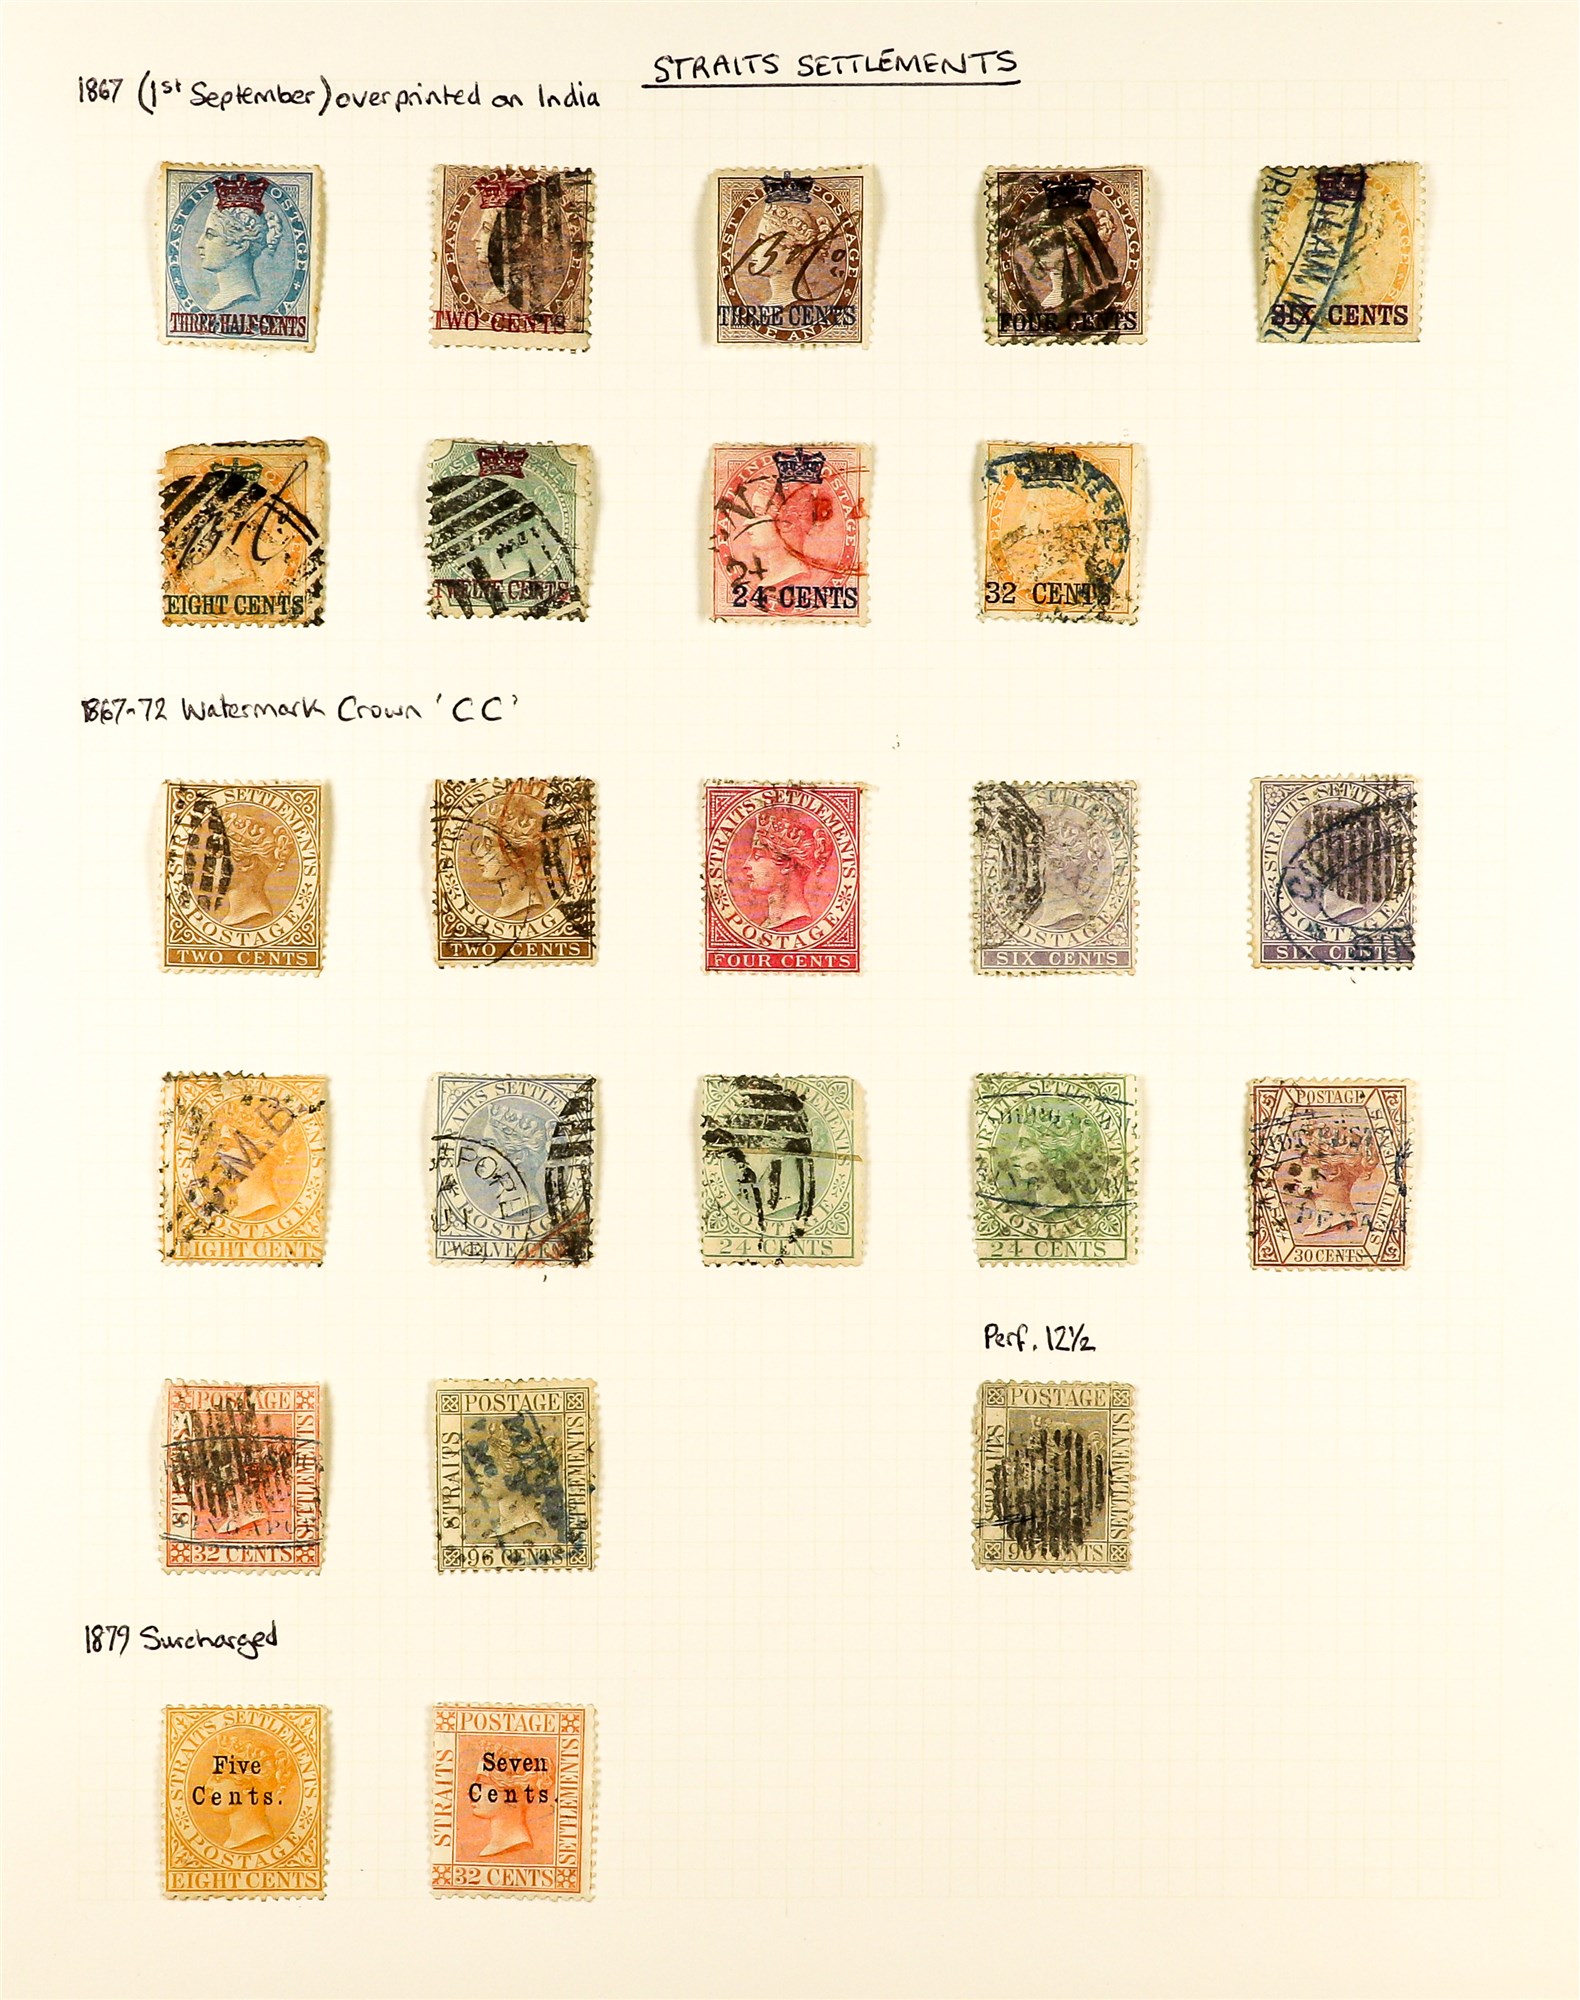 MALAYA-STRAITS SETT. 1867 - 1899 COLLECTION of over 100 chiefly used 19th Century stamps on album